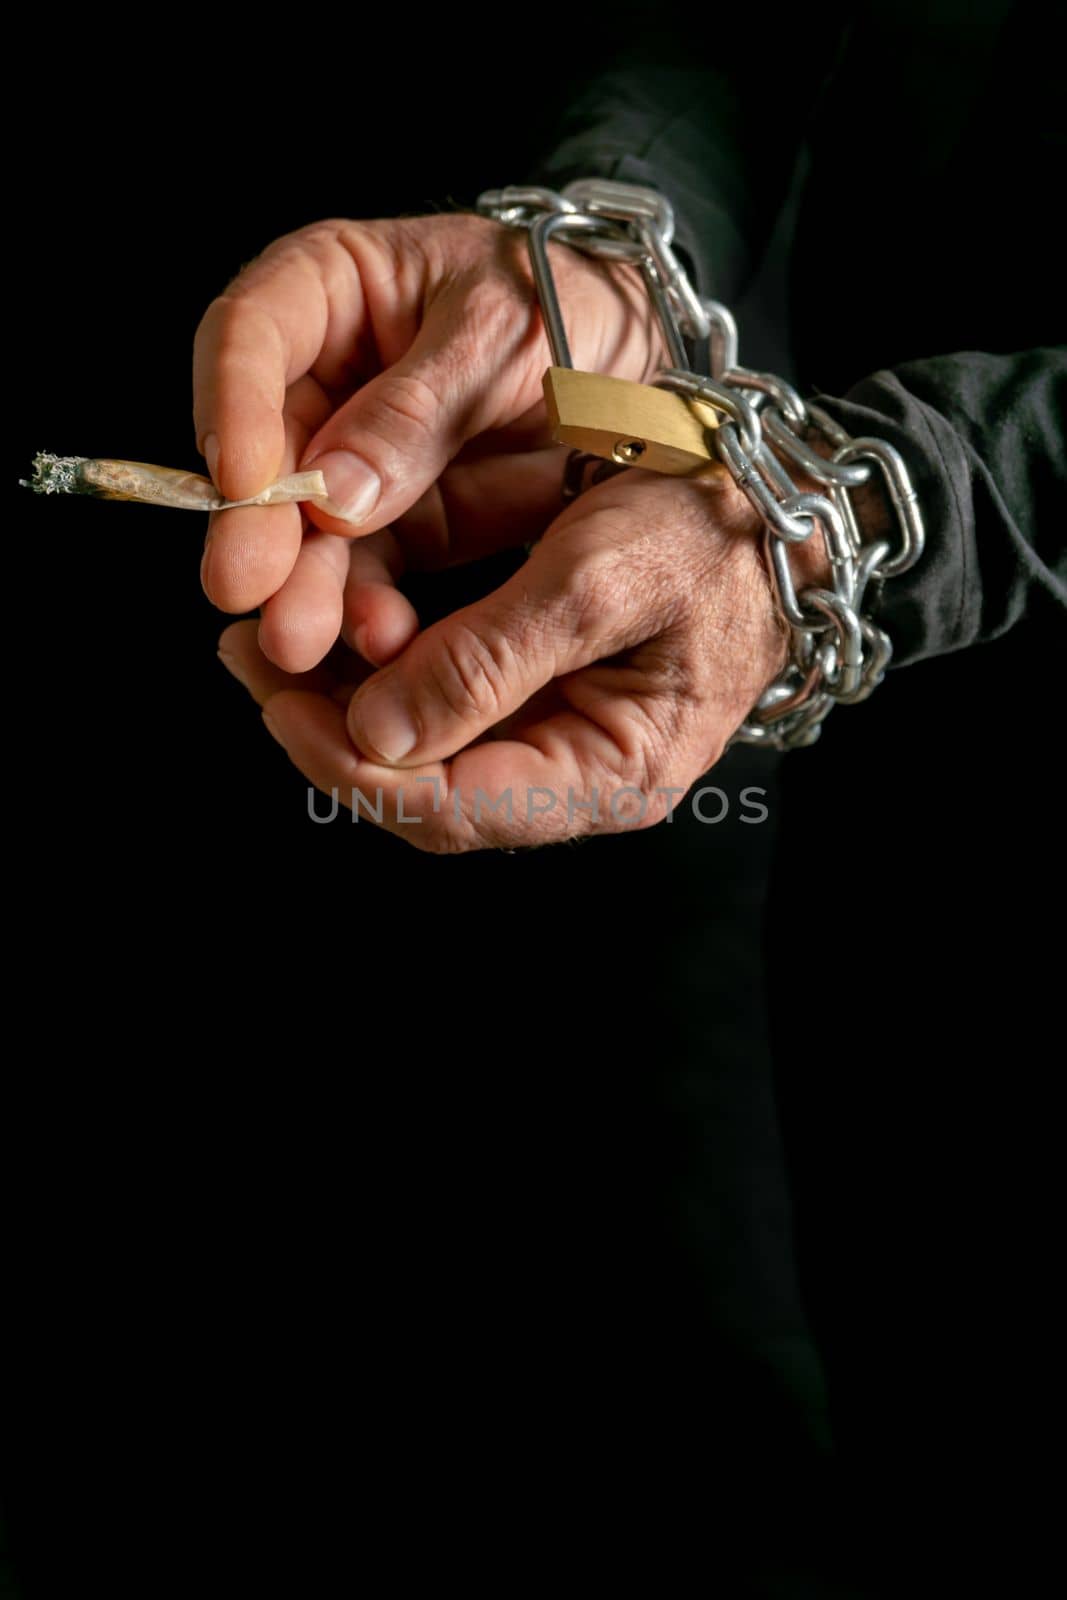 man smoking with chained hands,concept of addiction by joseantona